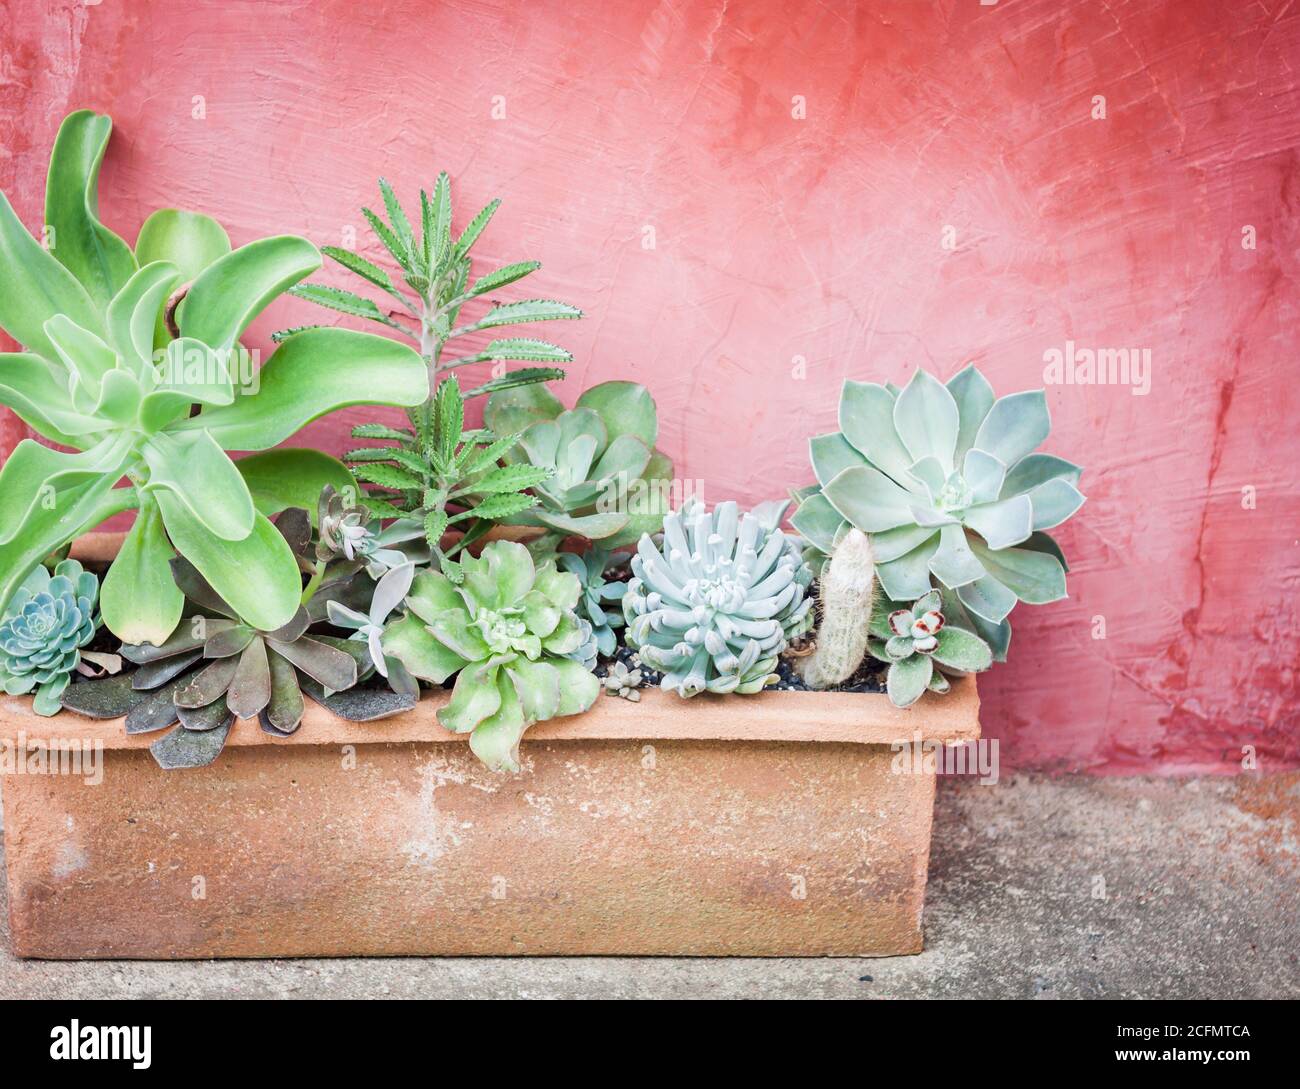 Cactus in pot with red background, stock photo Stock Photo